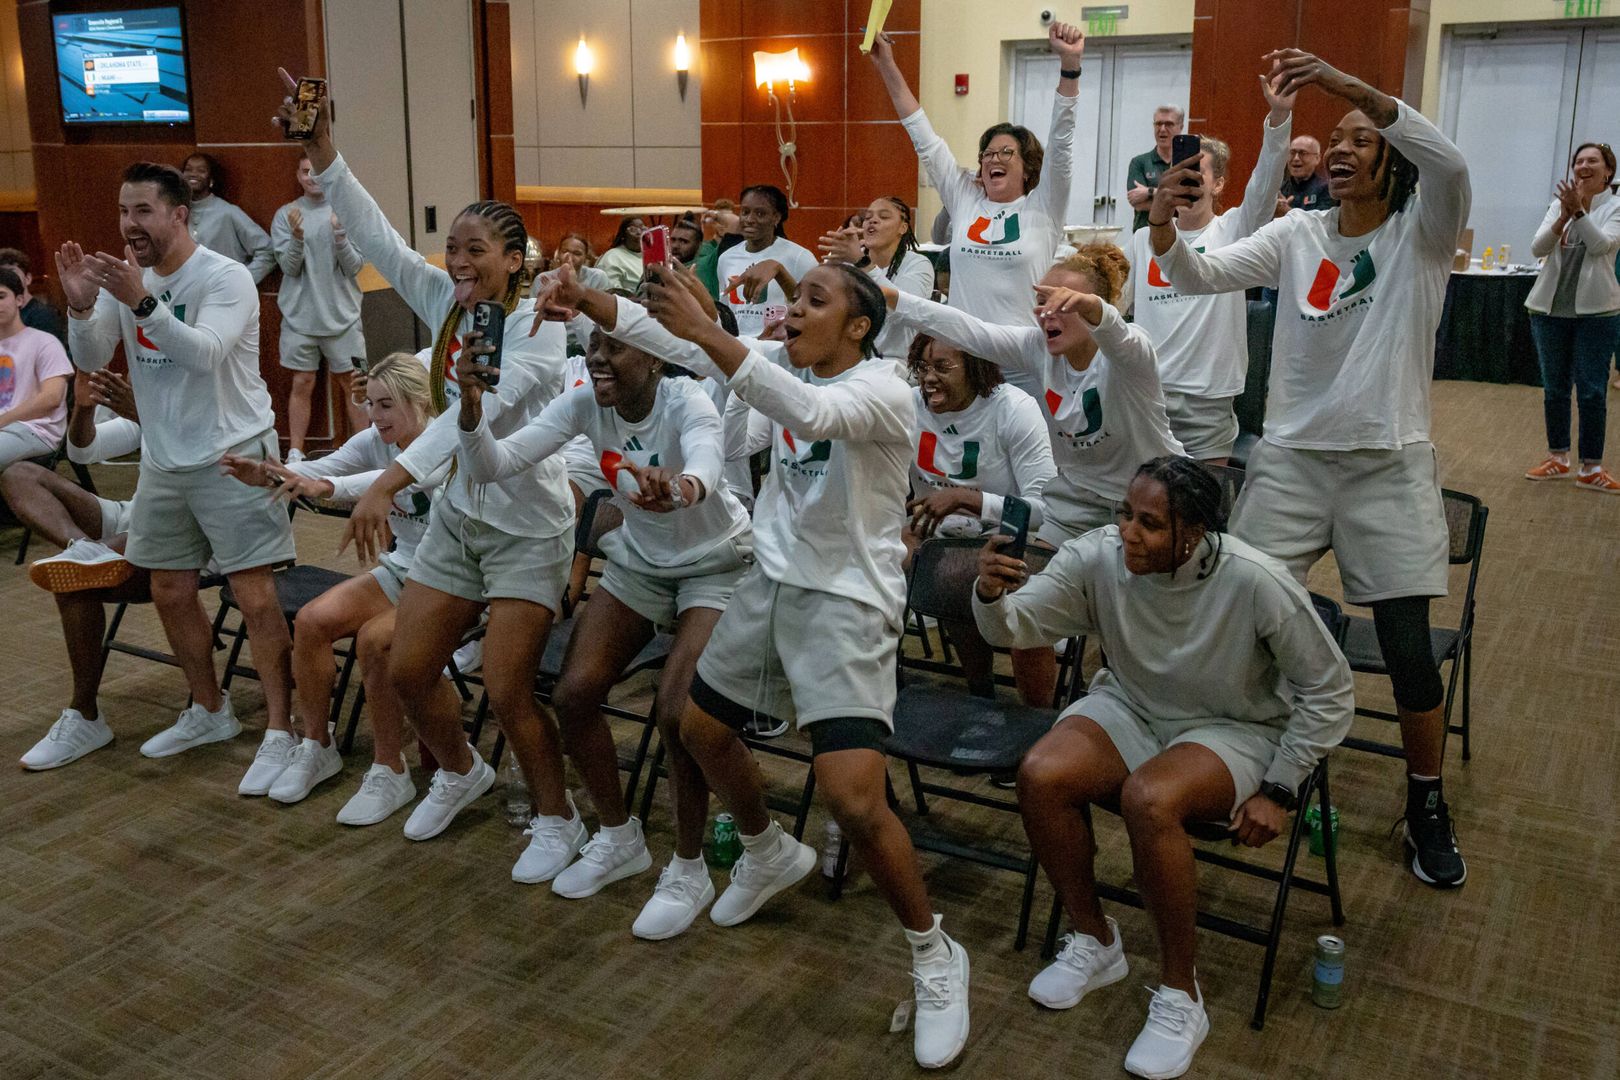 Miami Tabbed No. 9 Seed in 2023 NCAA Tournament